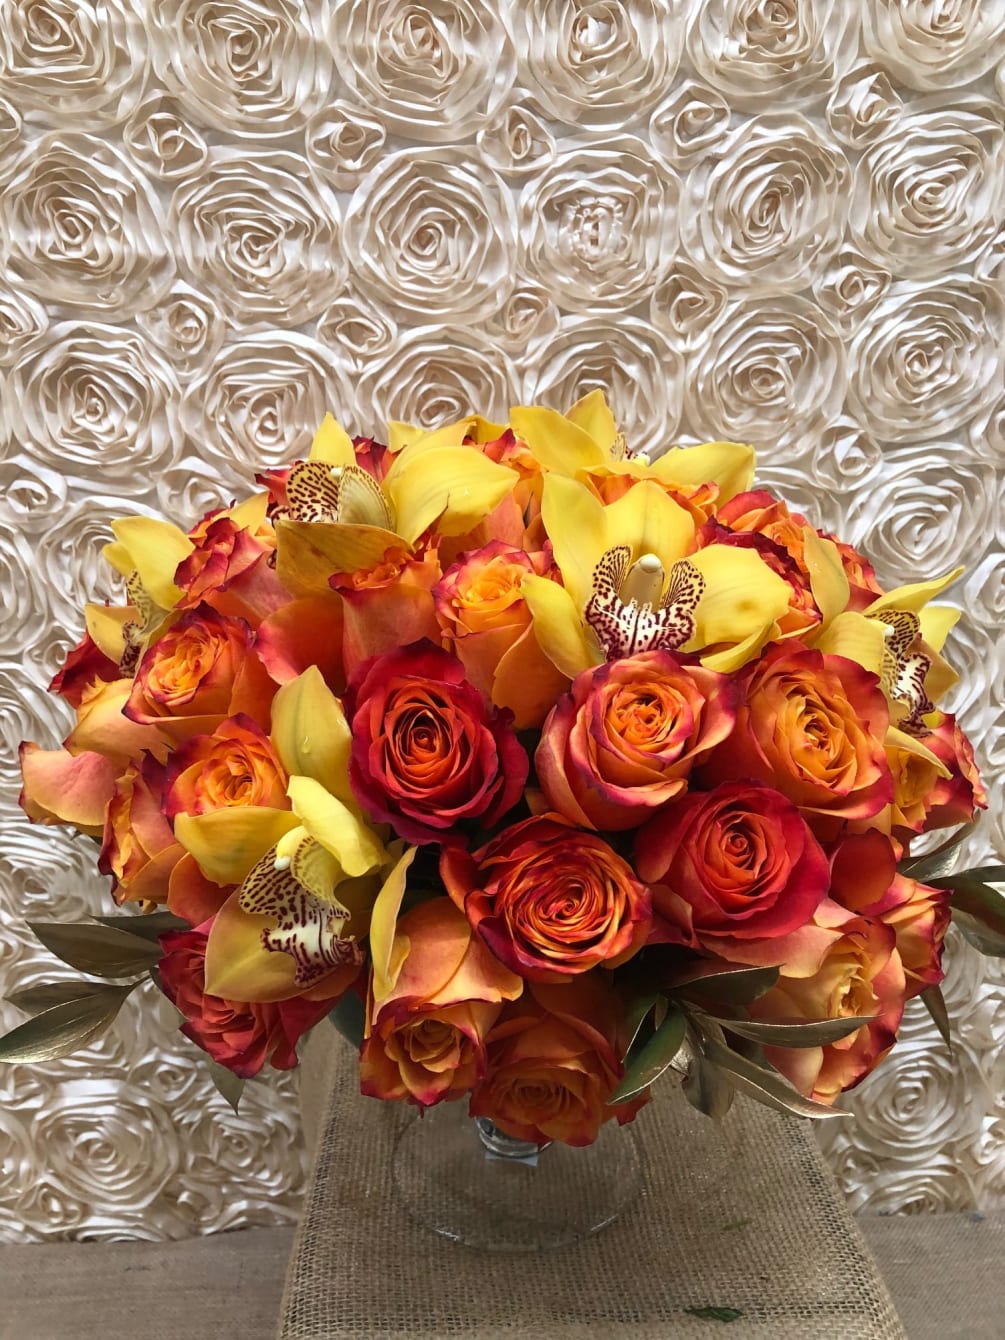 An absolutely stunning arrangement filled with all the gorgeous colors of the